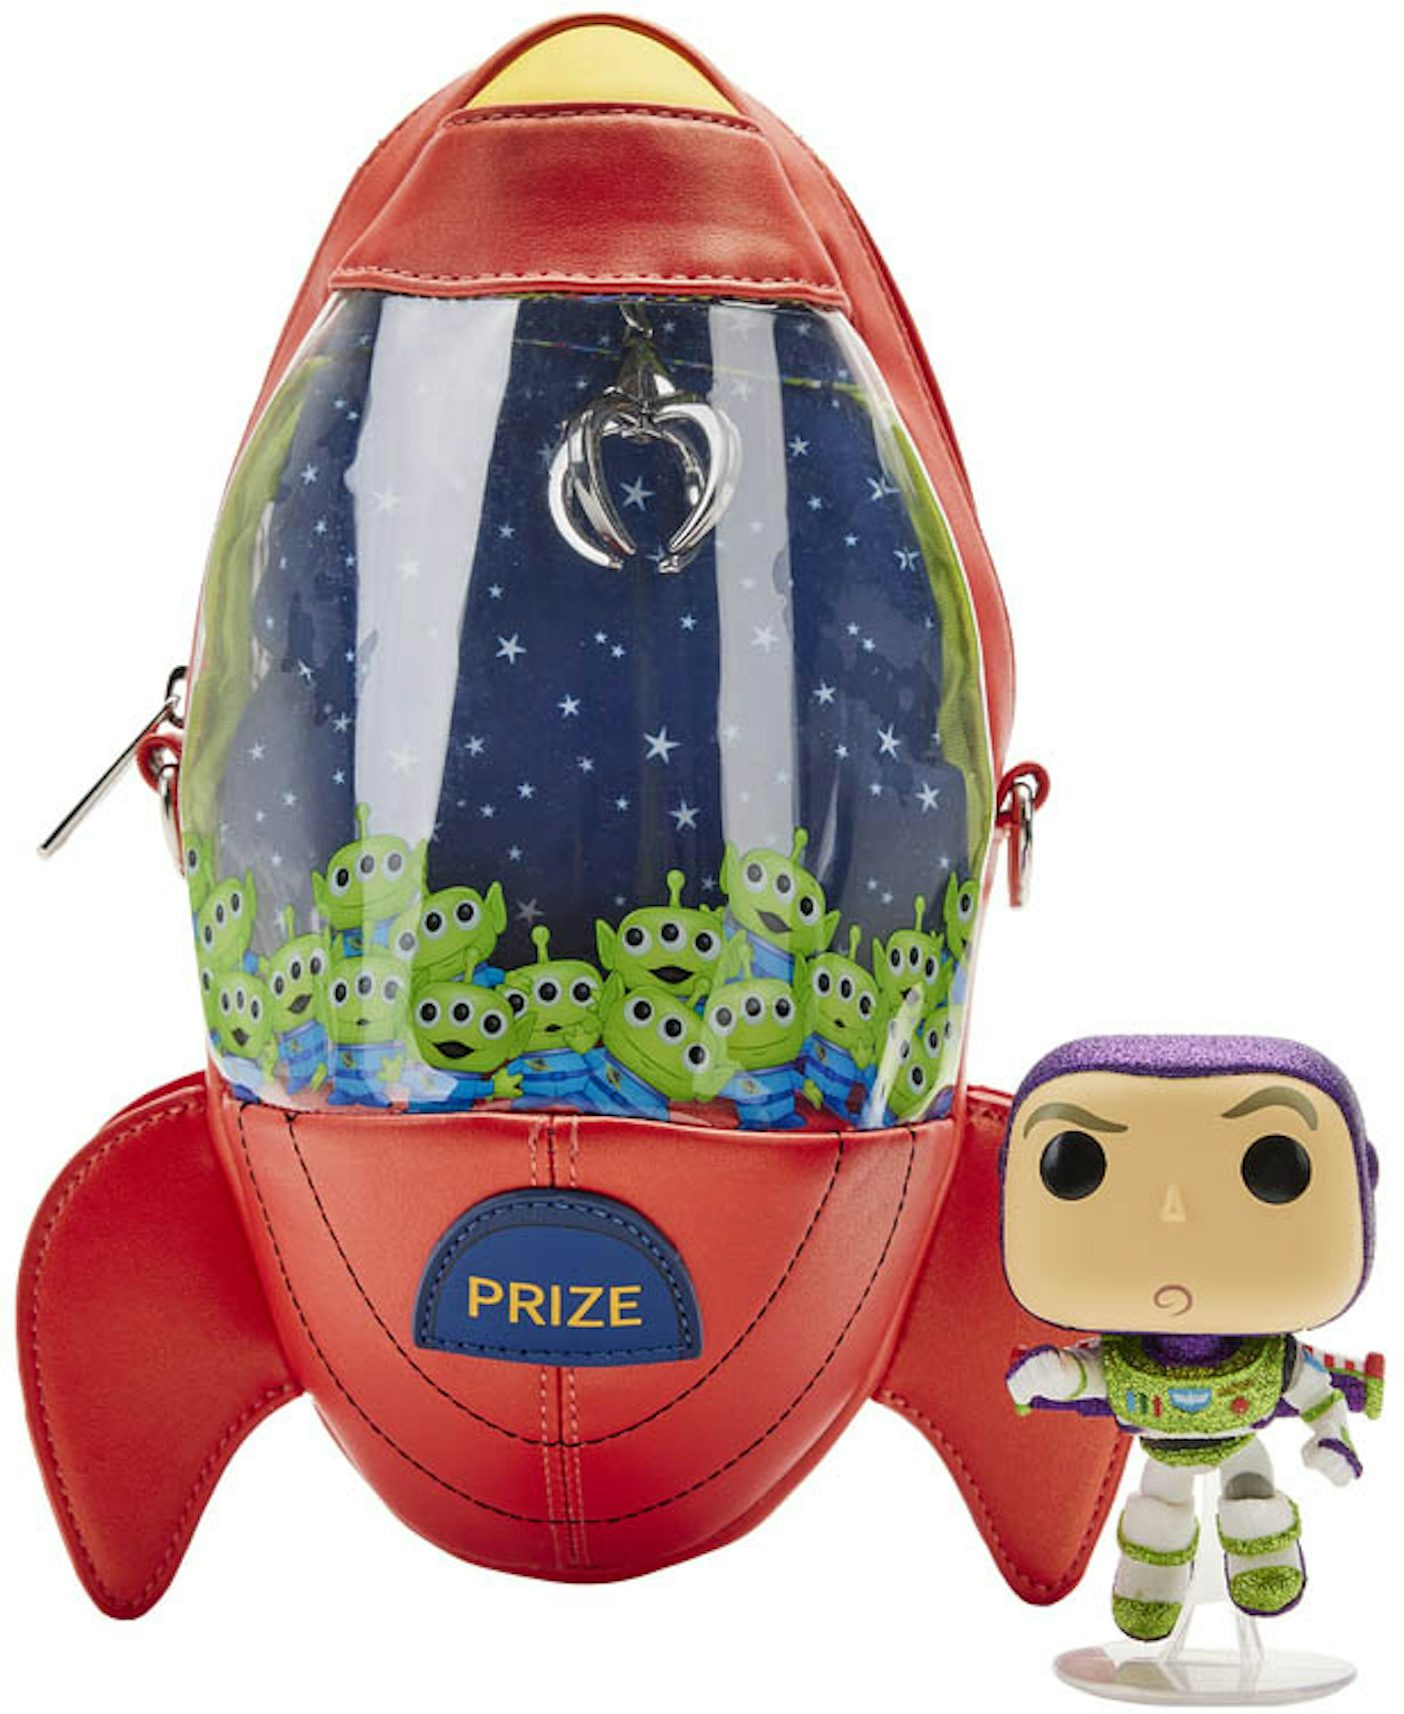 Loungefly Disney Pixar Toy Story Pizza Planet Bag & Funko Pop! Toy Story 4  Buzz Lightyear Diamond Collection Limited Edition Bundle - US